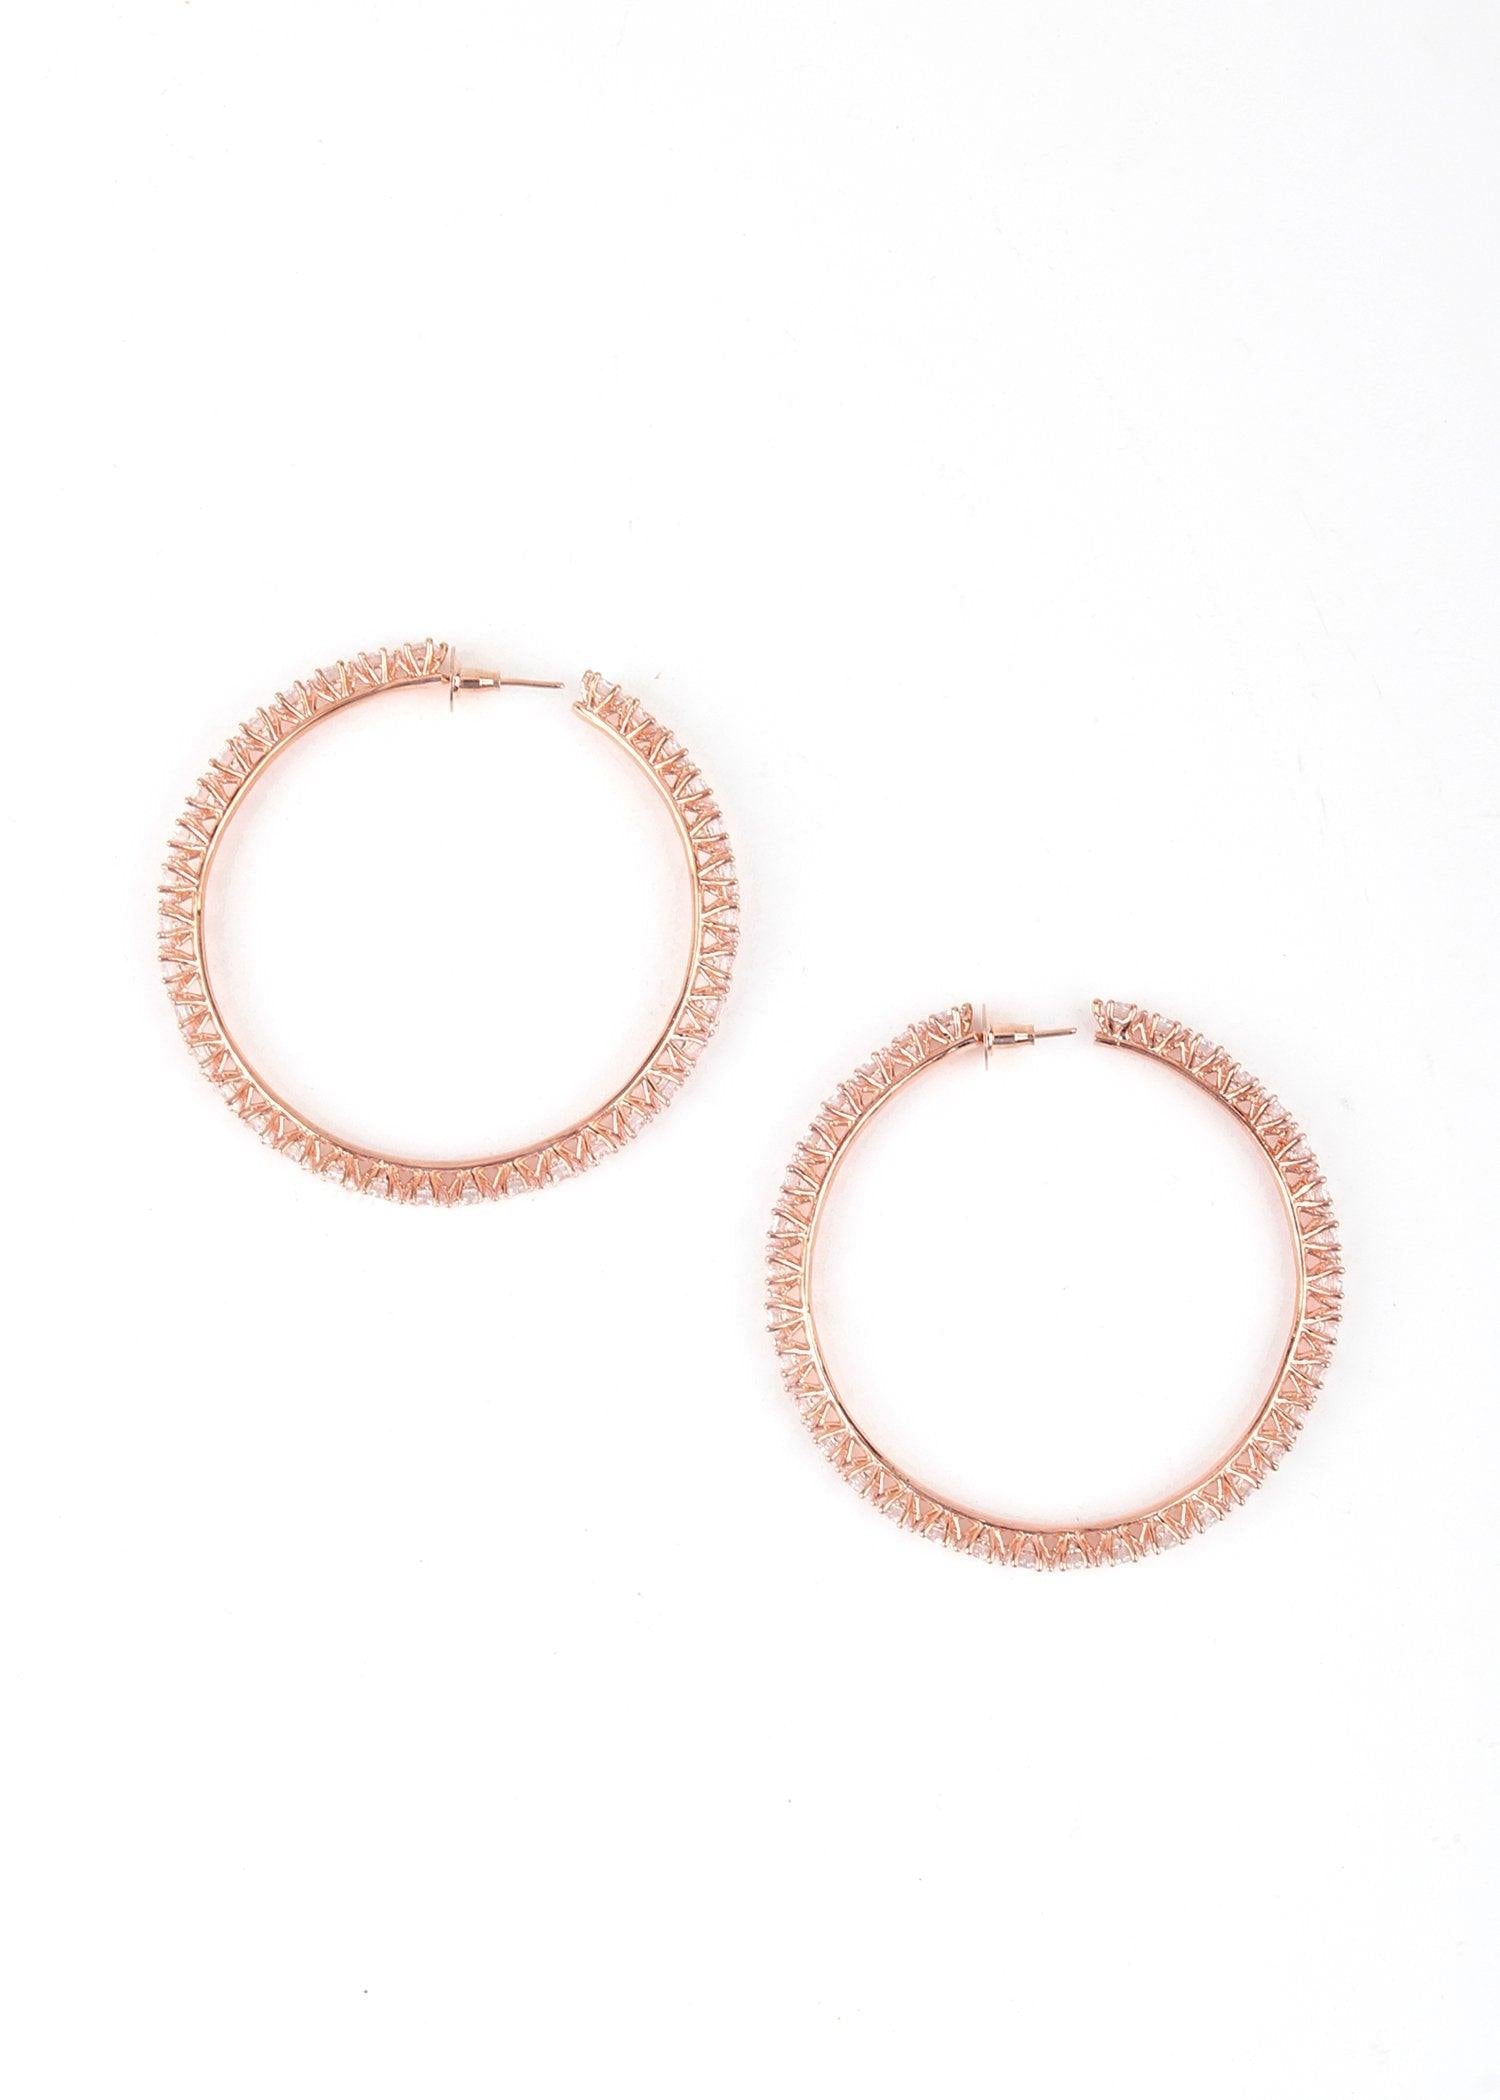 Women's Round Rose Gold Tone Hoops! - Odette